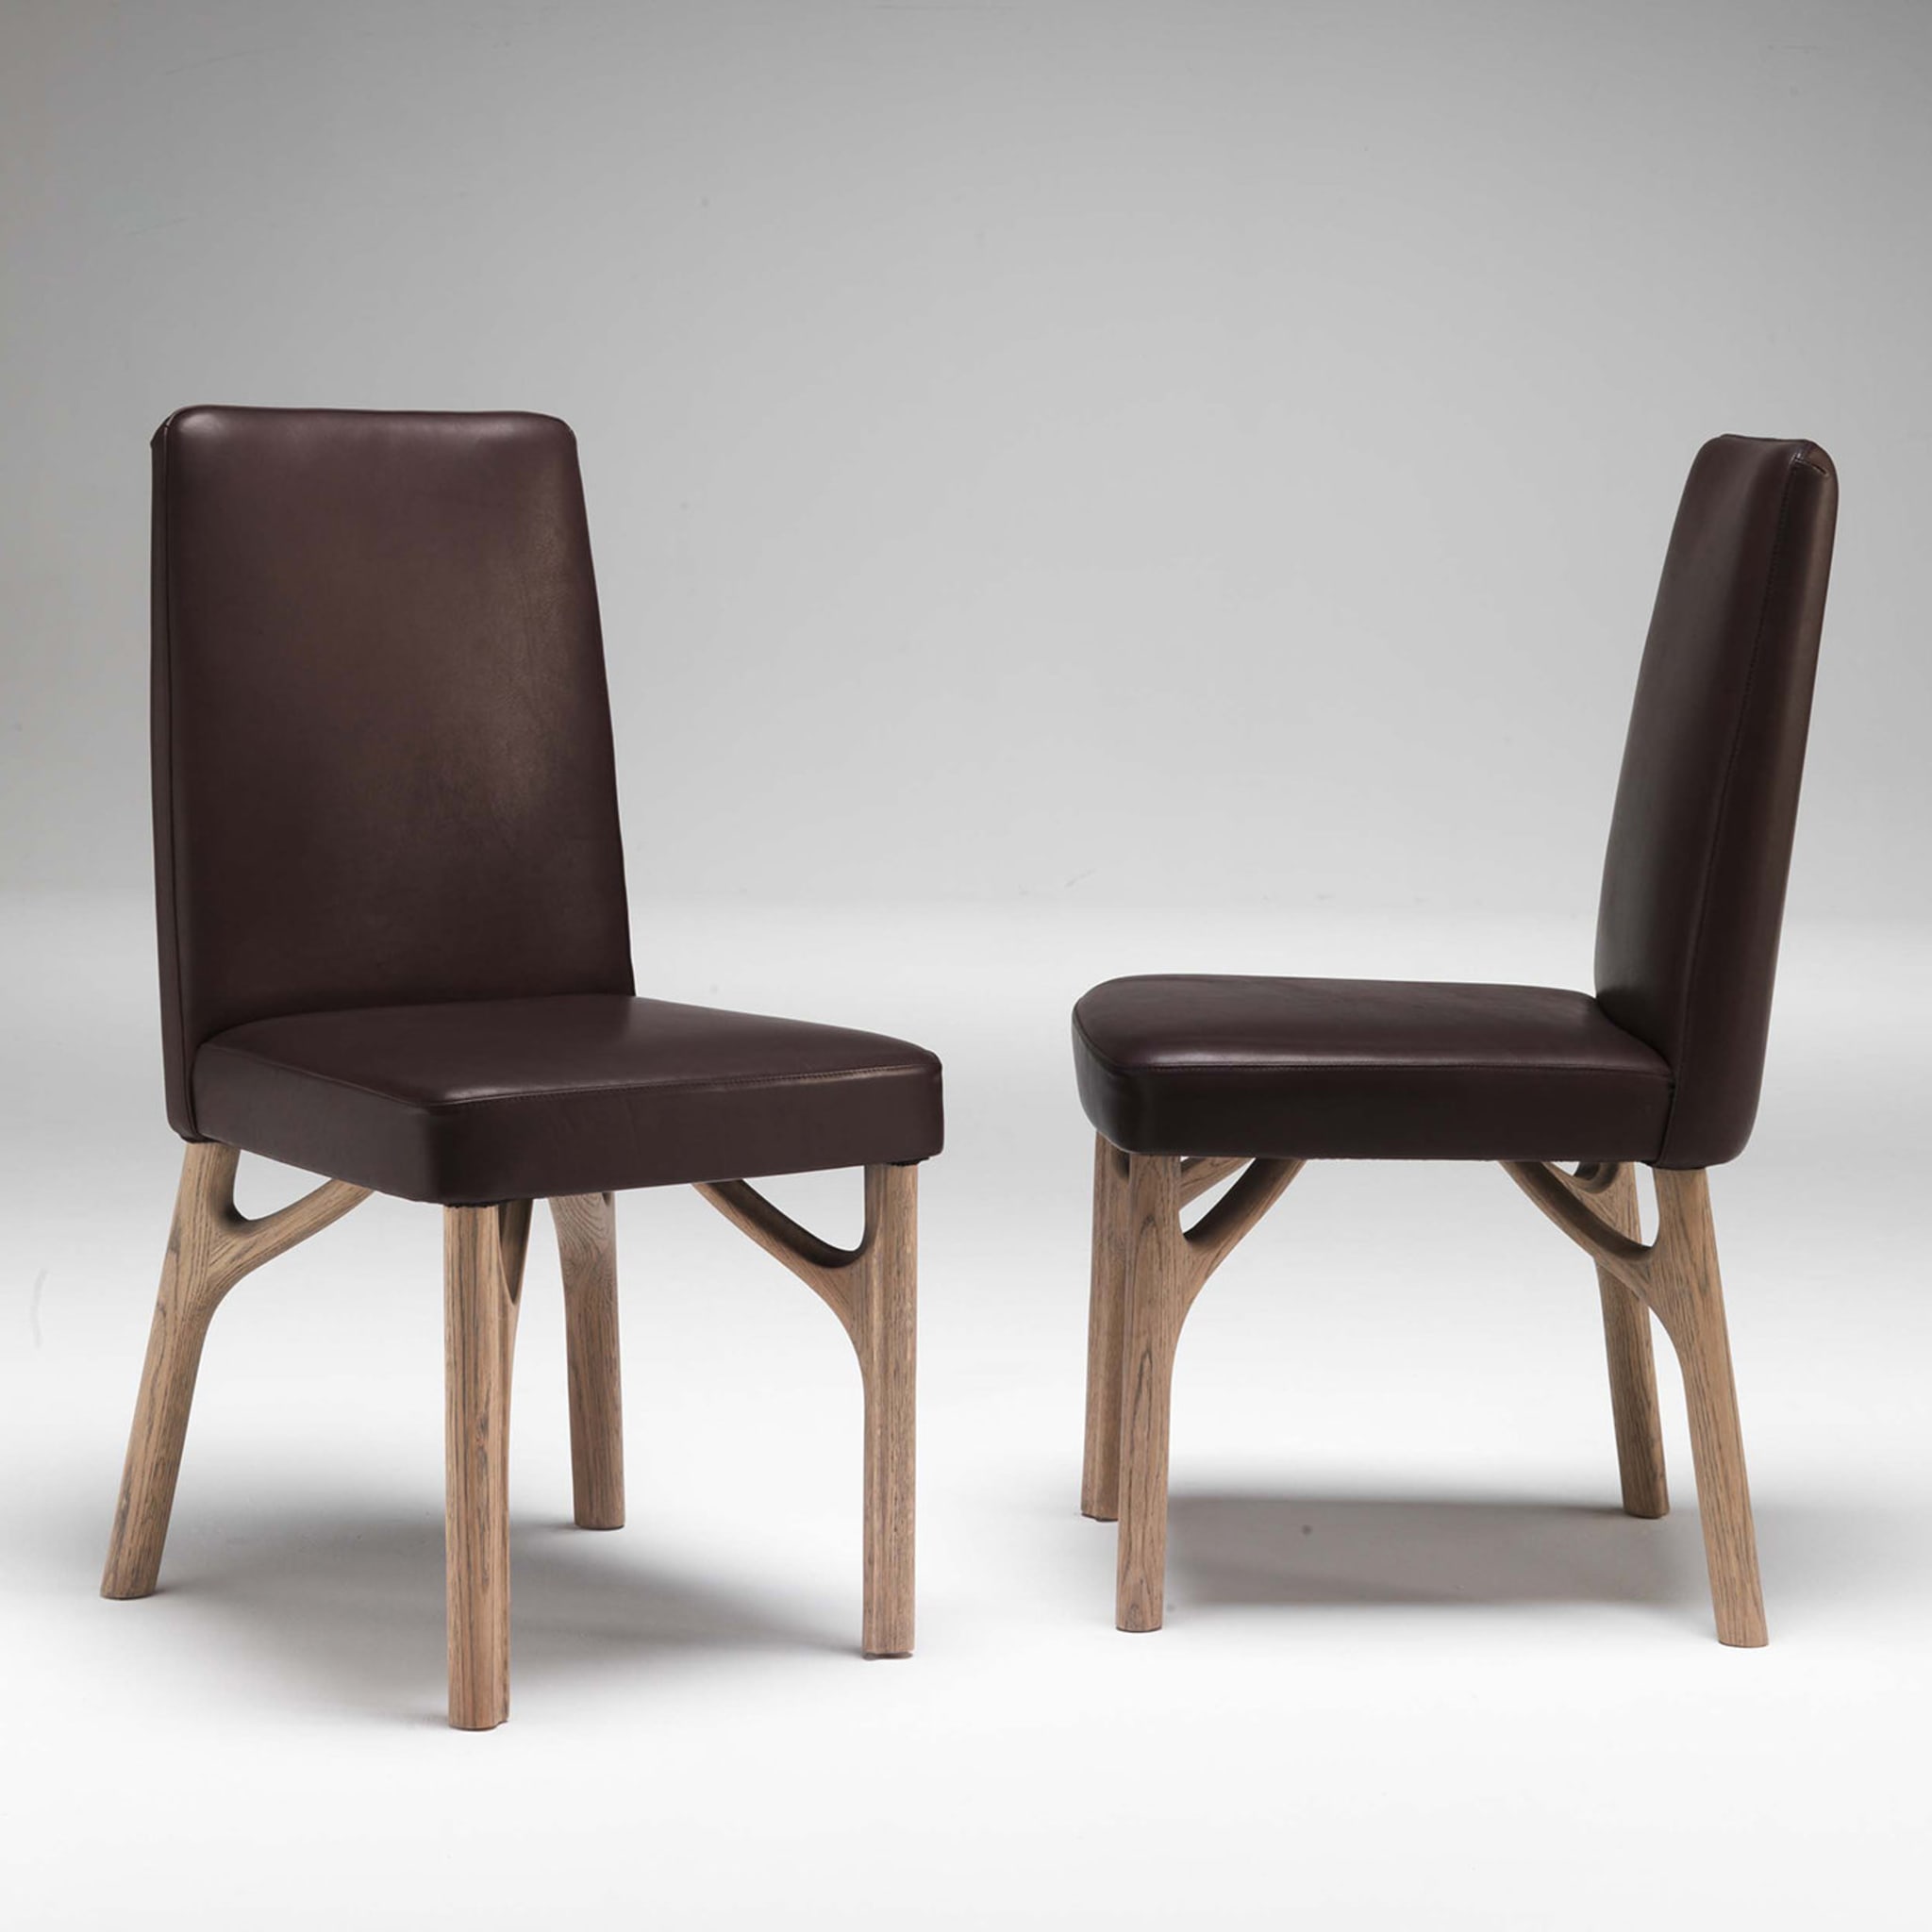 Arpeggio Chair by Giopato & Coombes - Alternative view 1